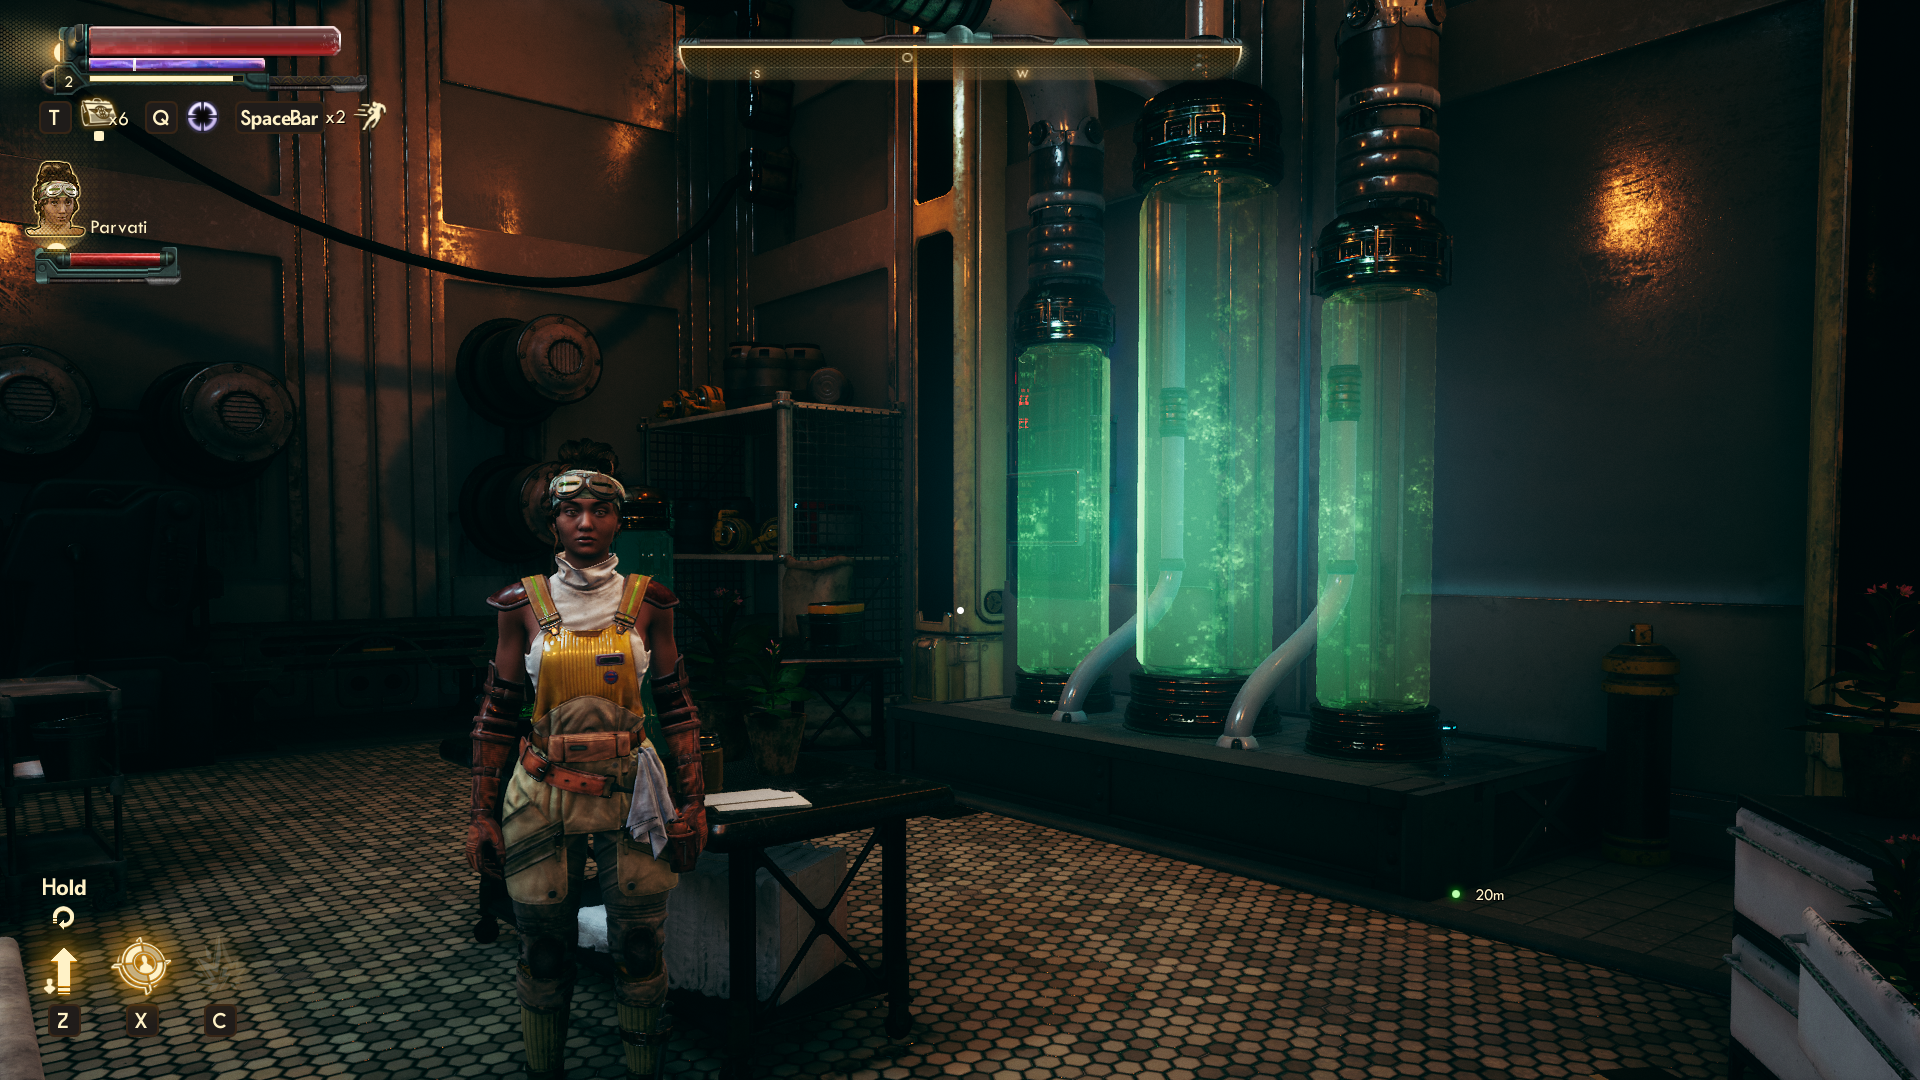 A labratory in The Outer Worlds: Spacer’s Choice Edition, showing three glowing tubes.